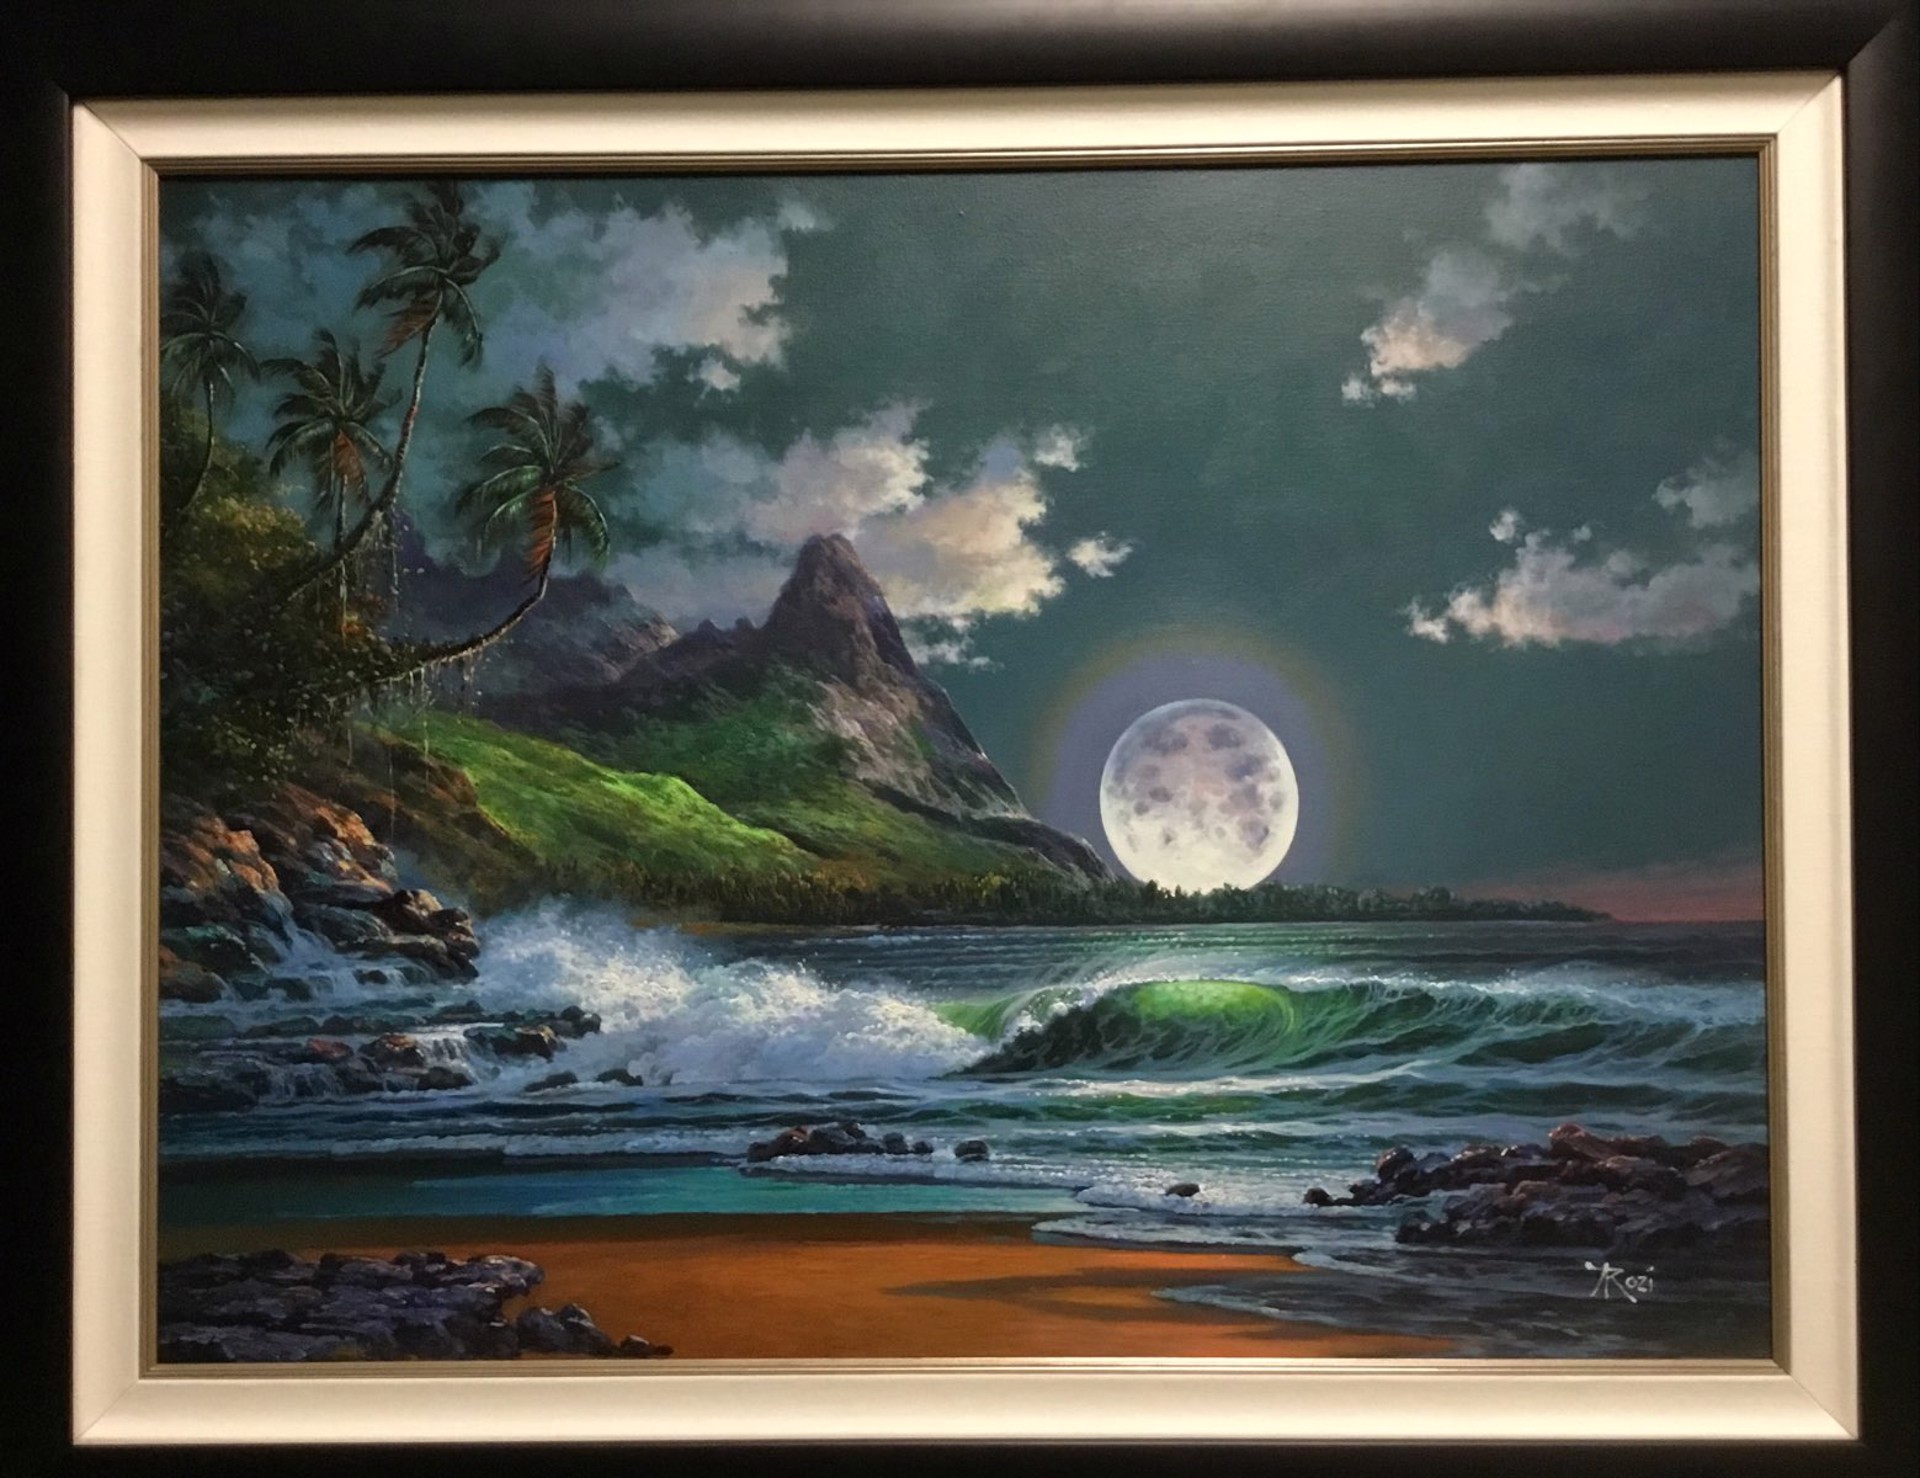 Full Moon in Paradise by Arozi